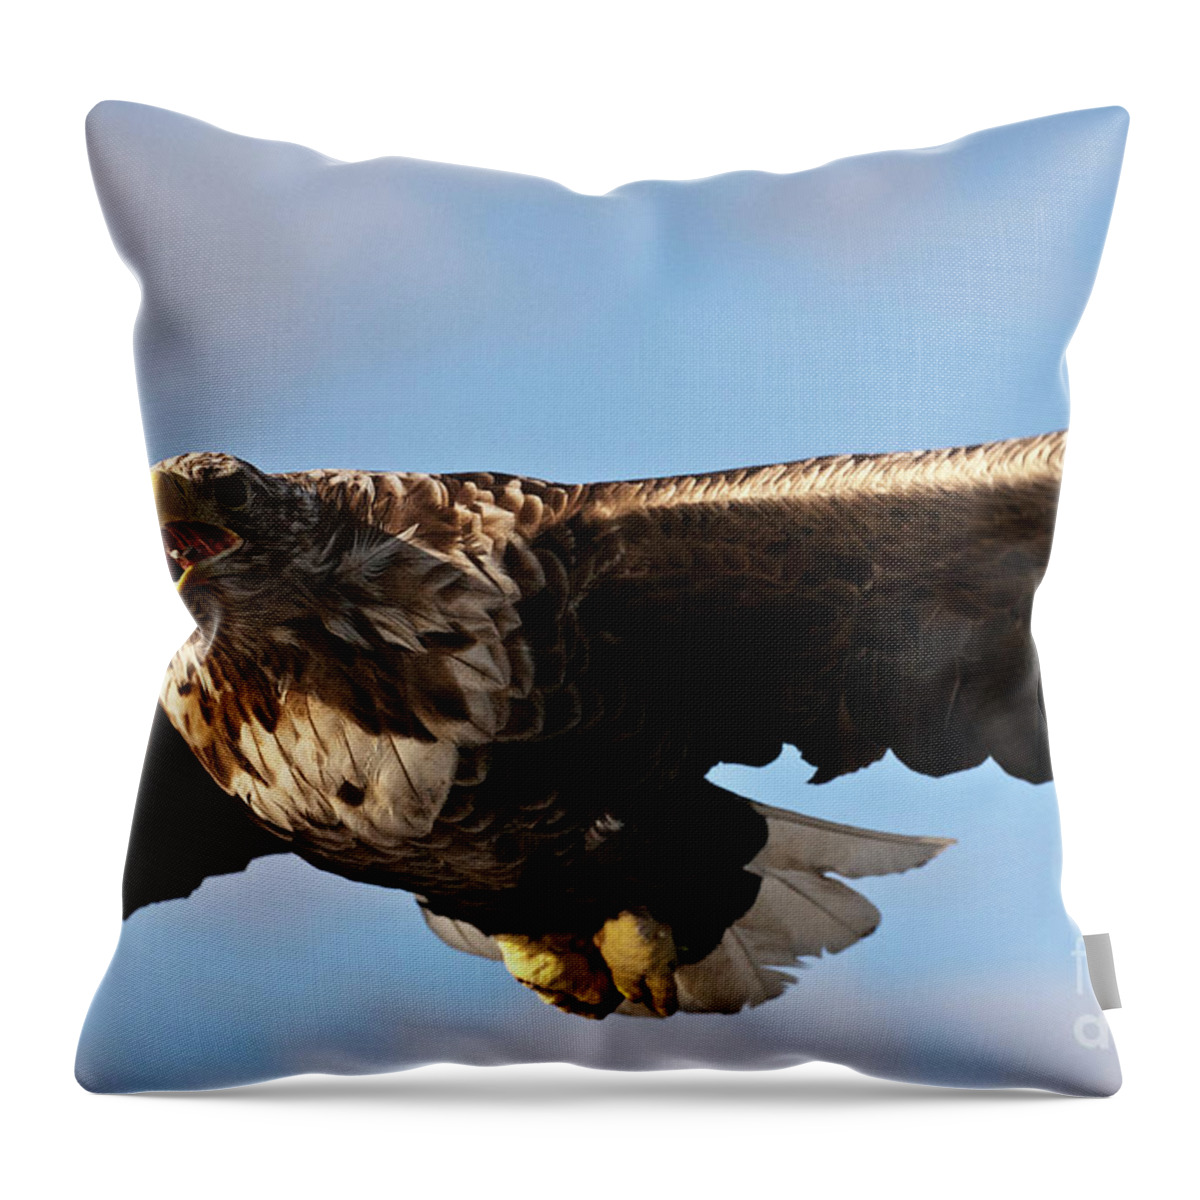 White_tailed Eagle Throw Pillow featuring the photograph European Flying Sea Eagle 1 by Heiko Koehrer-Wagner